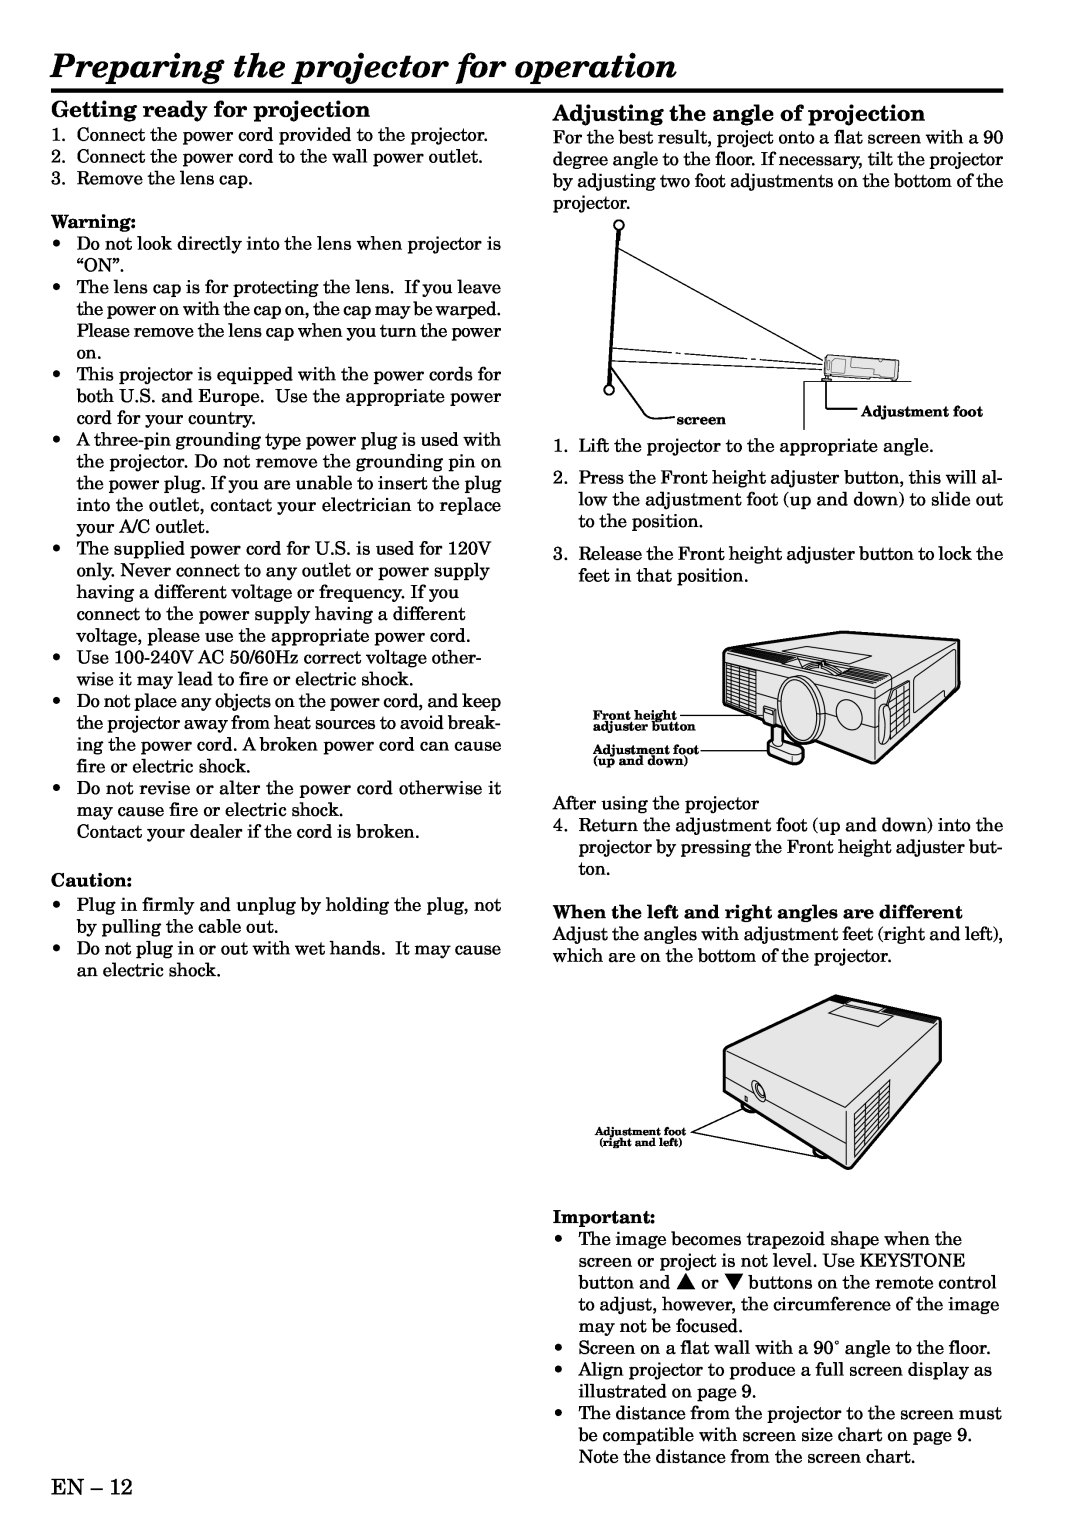 Mitsubishi Electronics X80 user manual Preparing the projector for operation, Getting ready for projection 